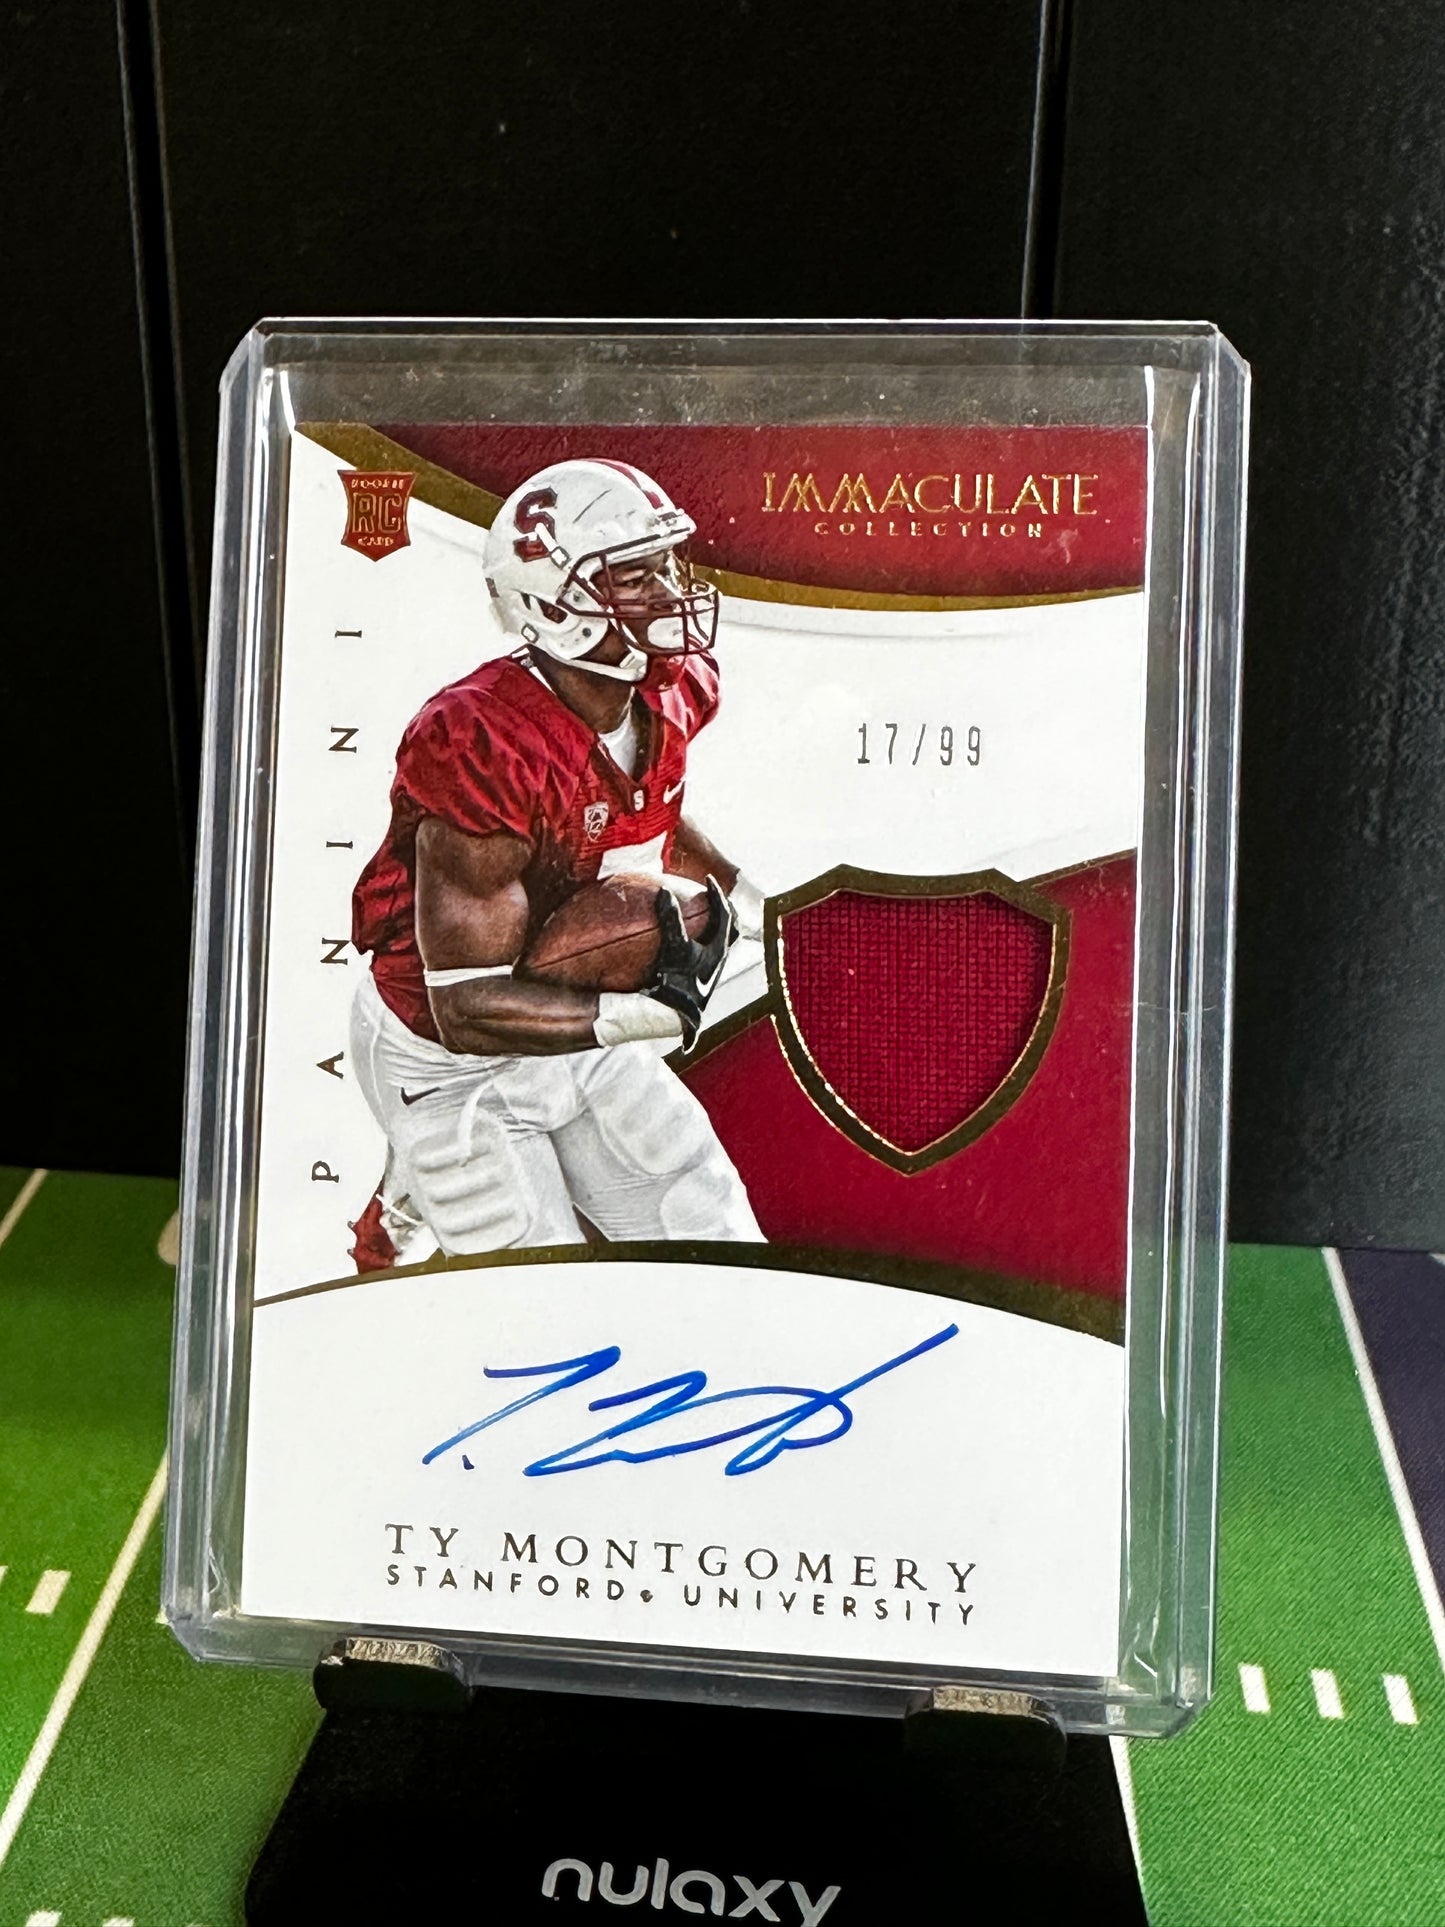 2015 Ty Montgomery Panini Immaculate RPA #333 Stanford /99